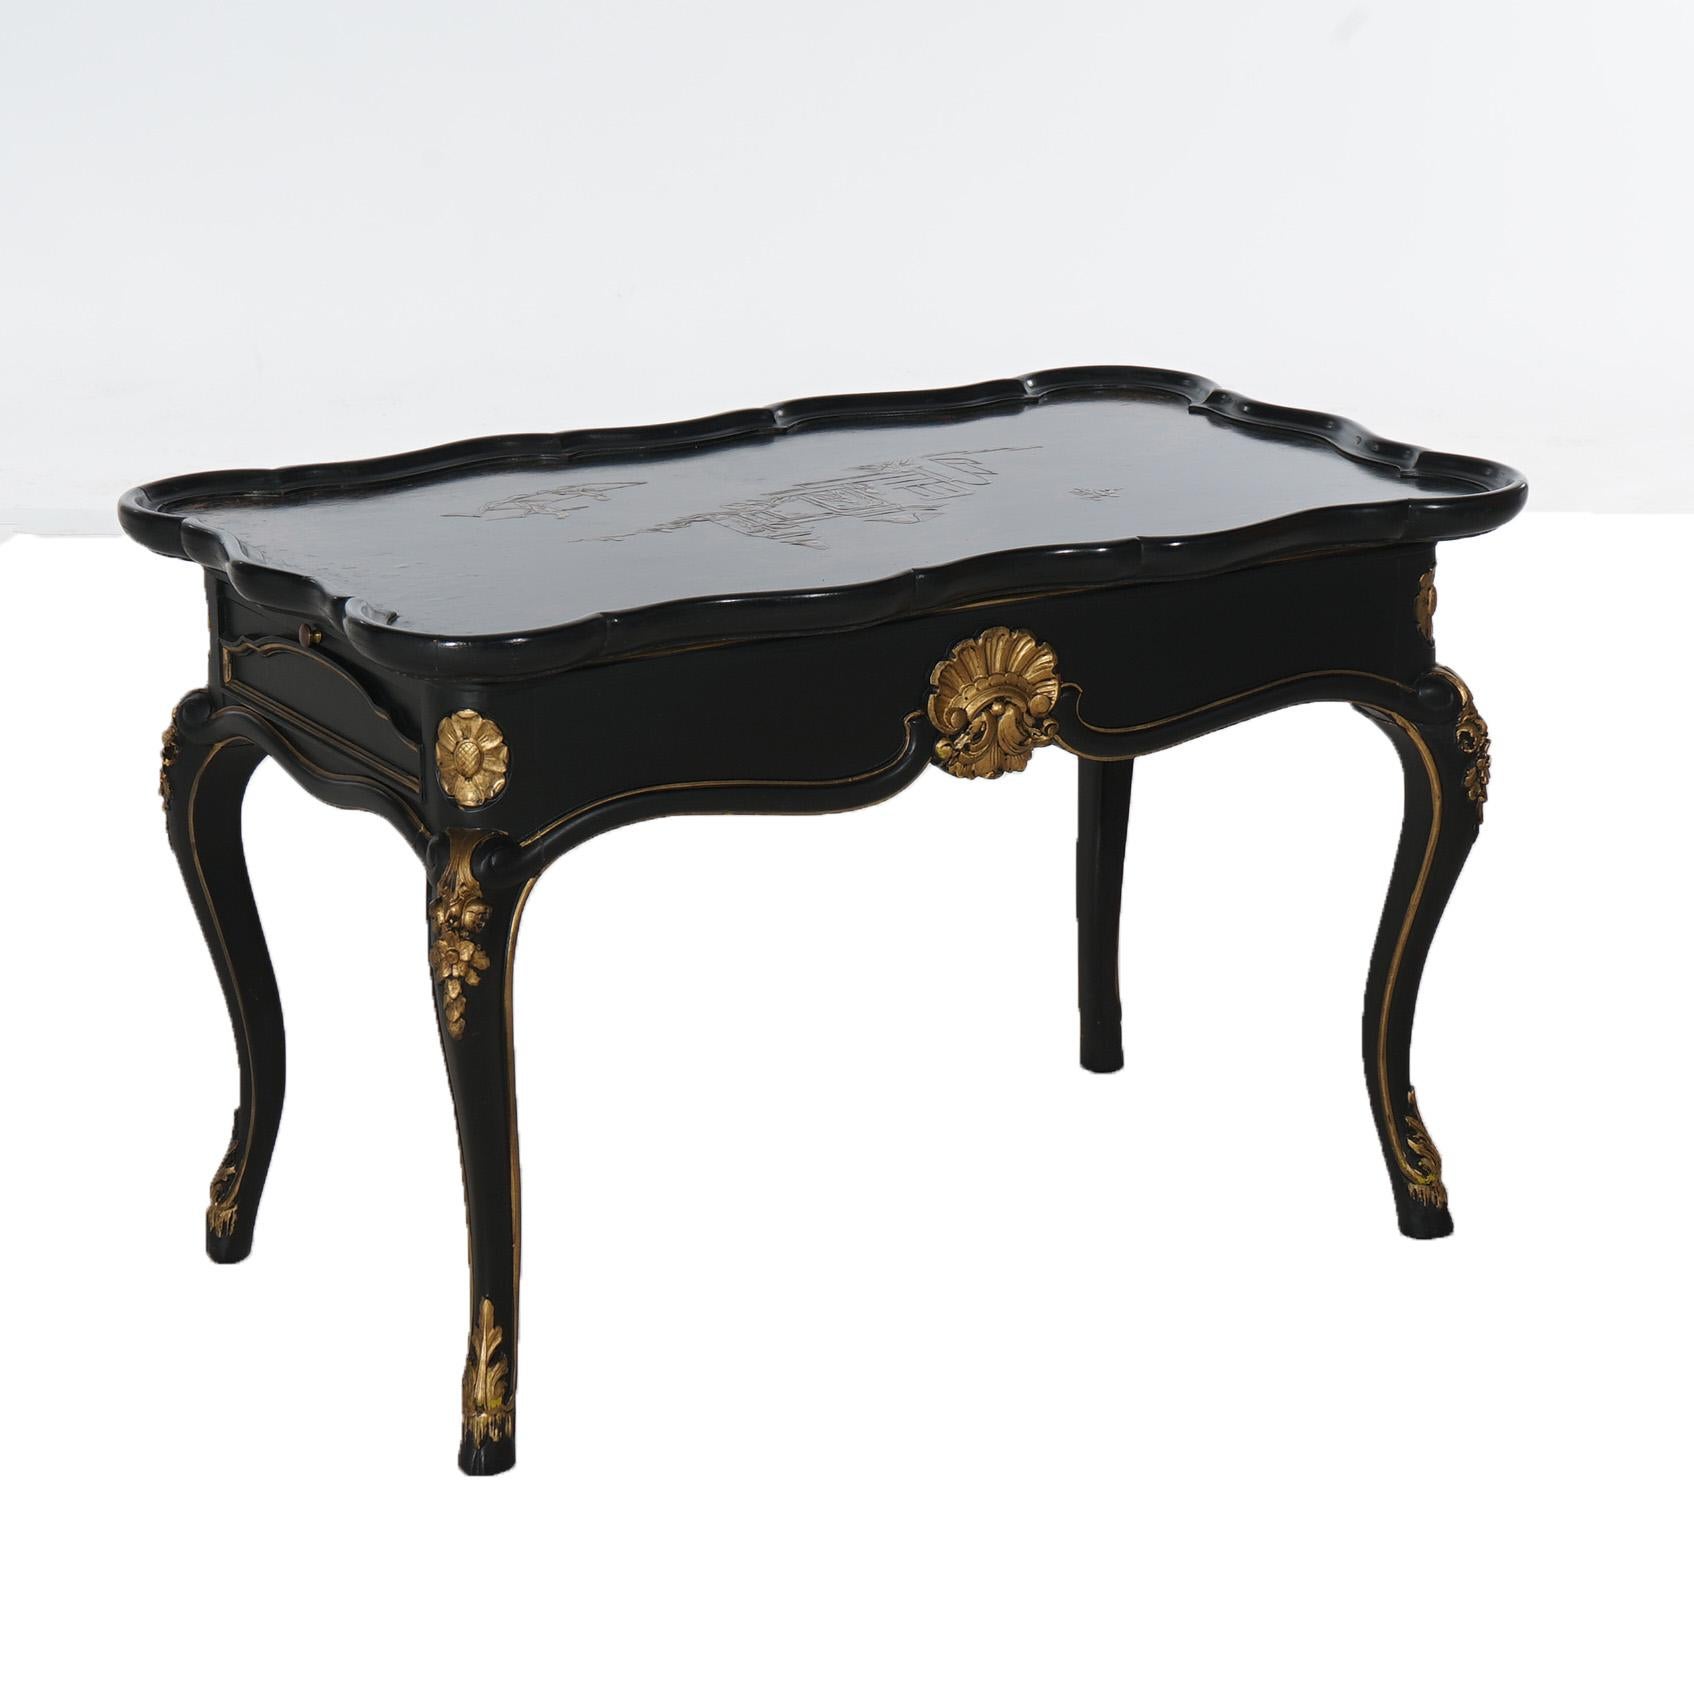  Antique French Style Chinoiserie Gilt Decorated Ebonized Low Tea Table C1930 2